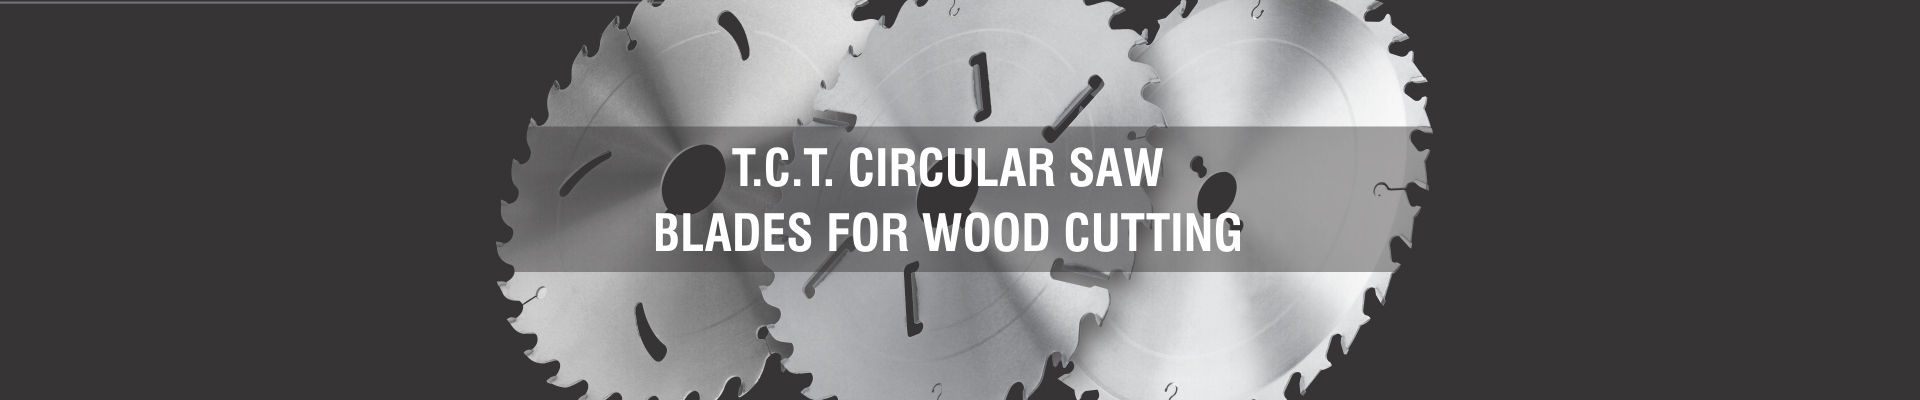 Wood Cutting Blades Manufacturer in India,
Circular Saws Blades Manufacturer in Pune,
Circular Saws Blades Manufacturer in Bangalore,
Circular Saws Blades Manufacturer in Delhi,
Circular Saws Blades Manufacturer in Kerla
